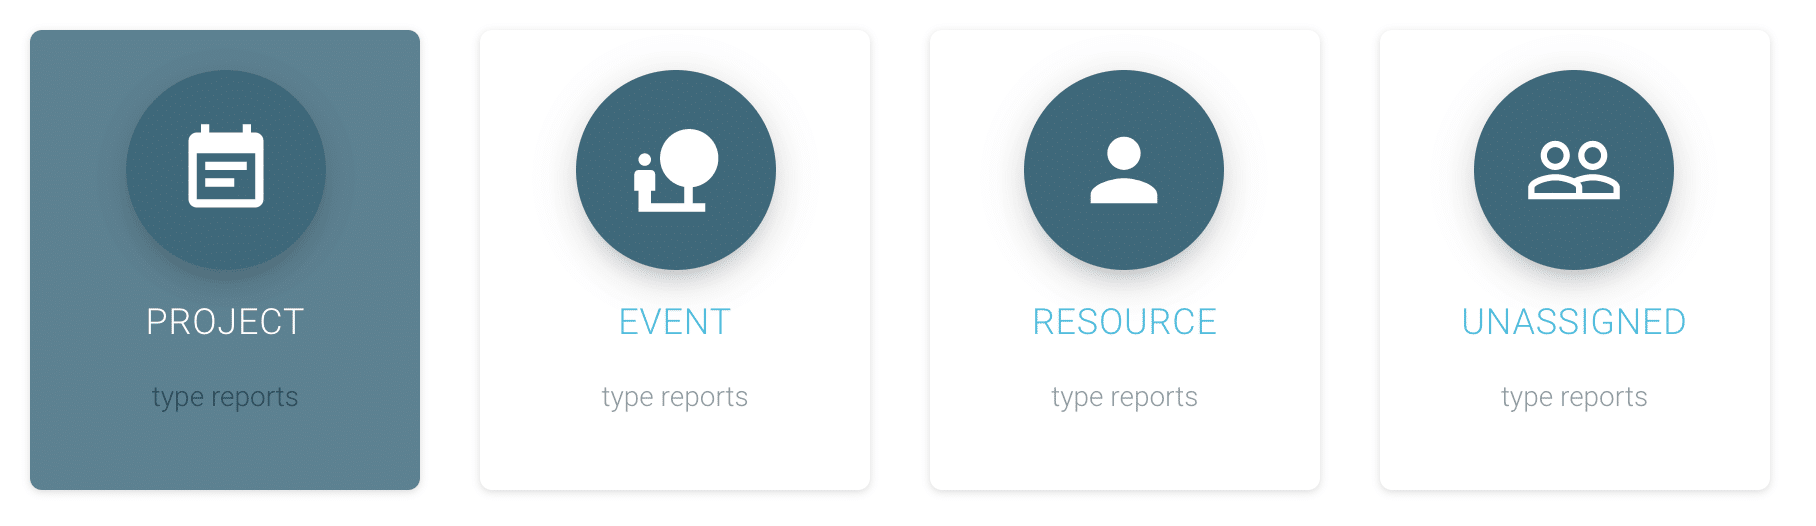 Project_and_Resource_Reports